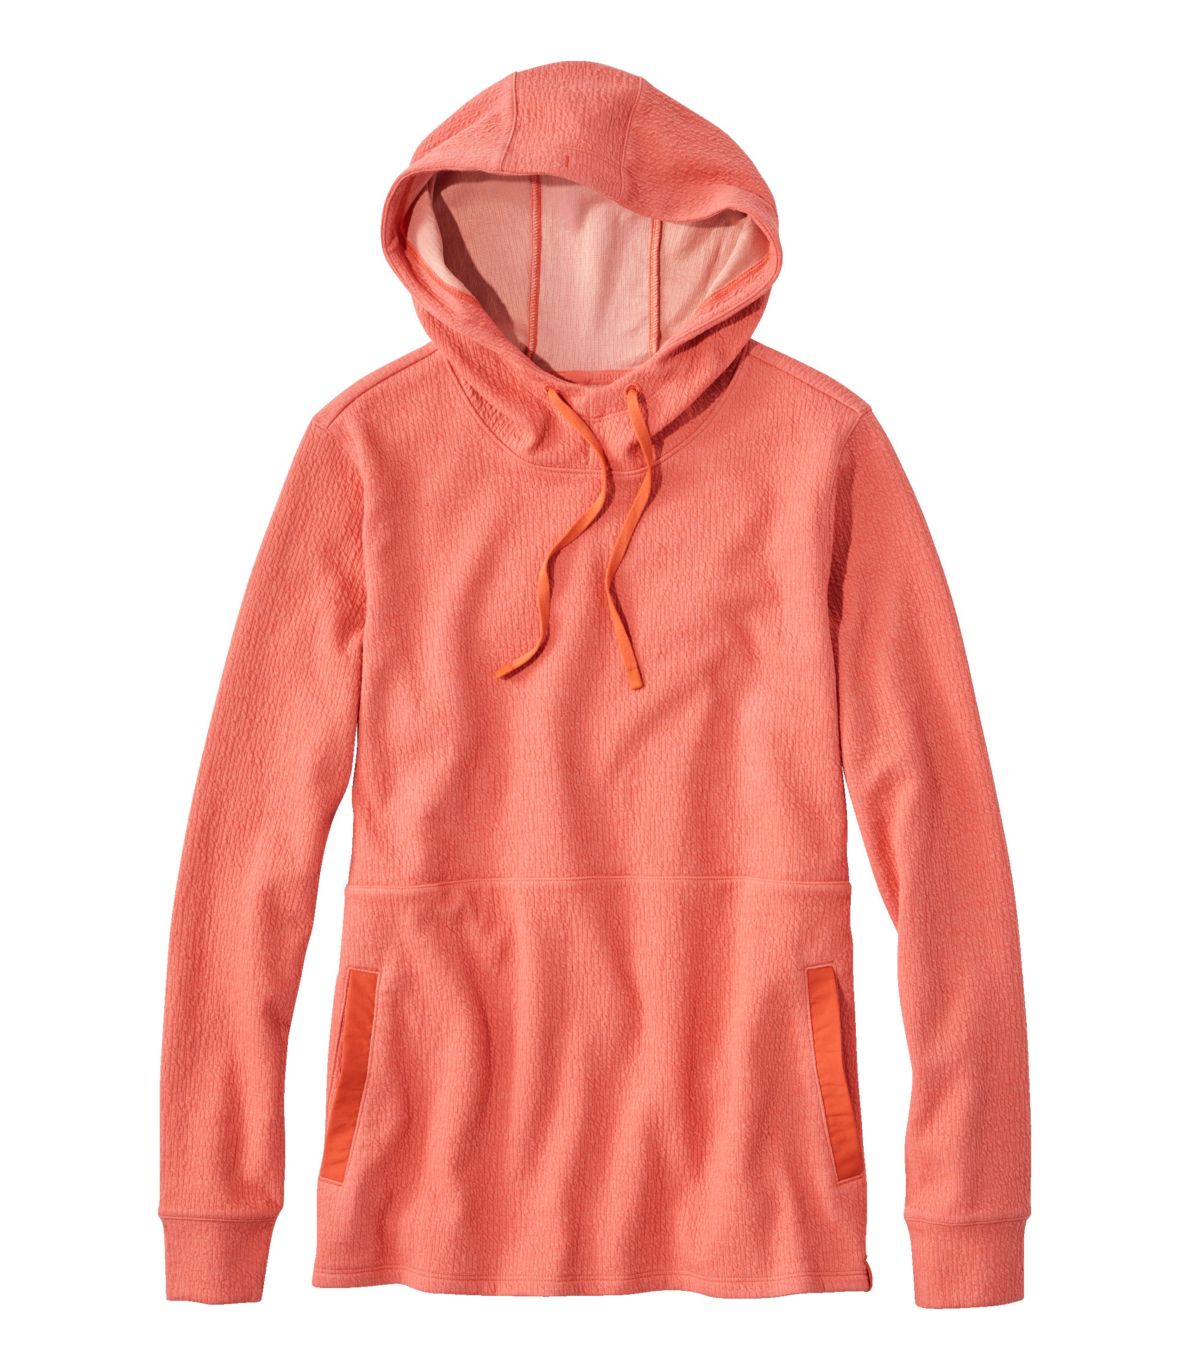 Women's Double Layer Textured Pullover, Hoodie